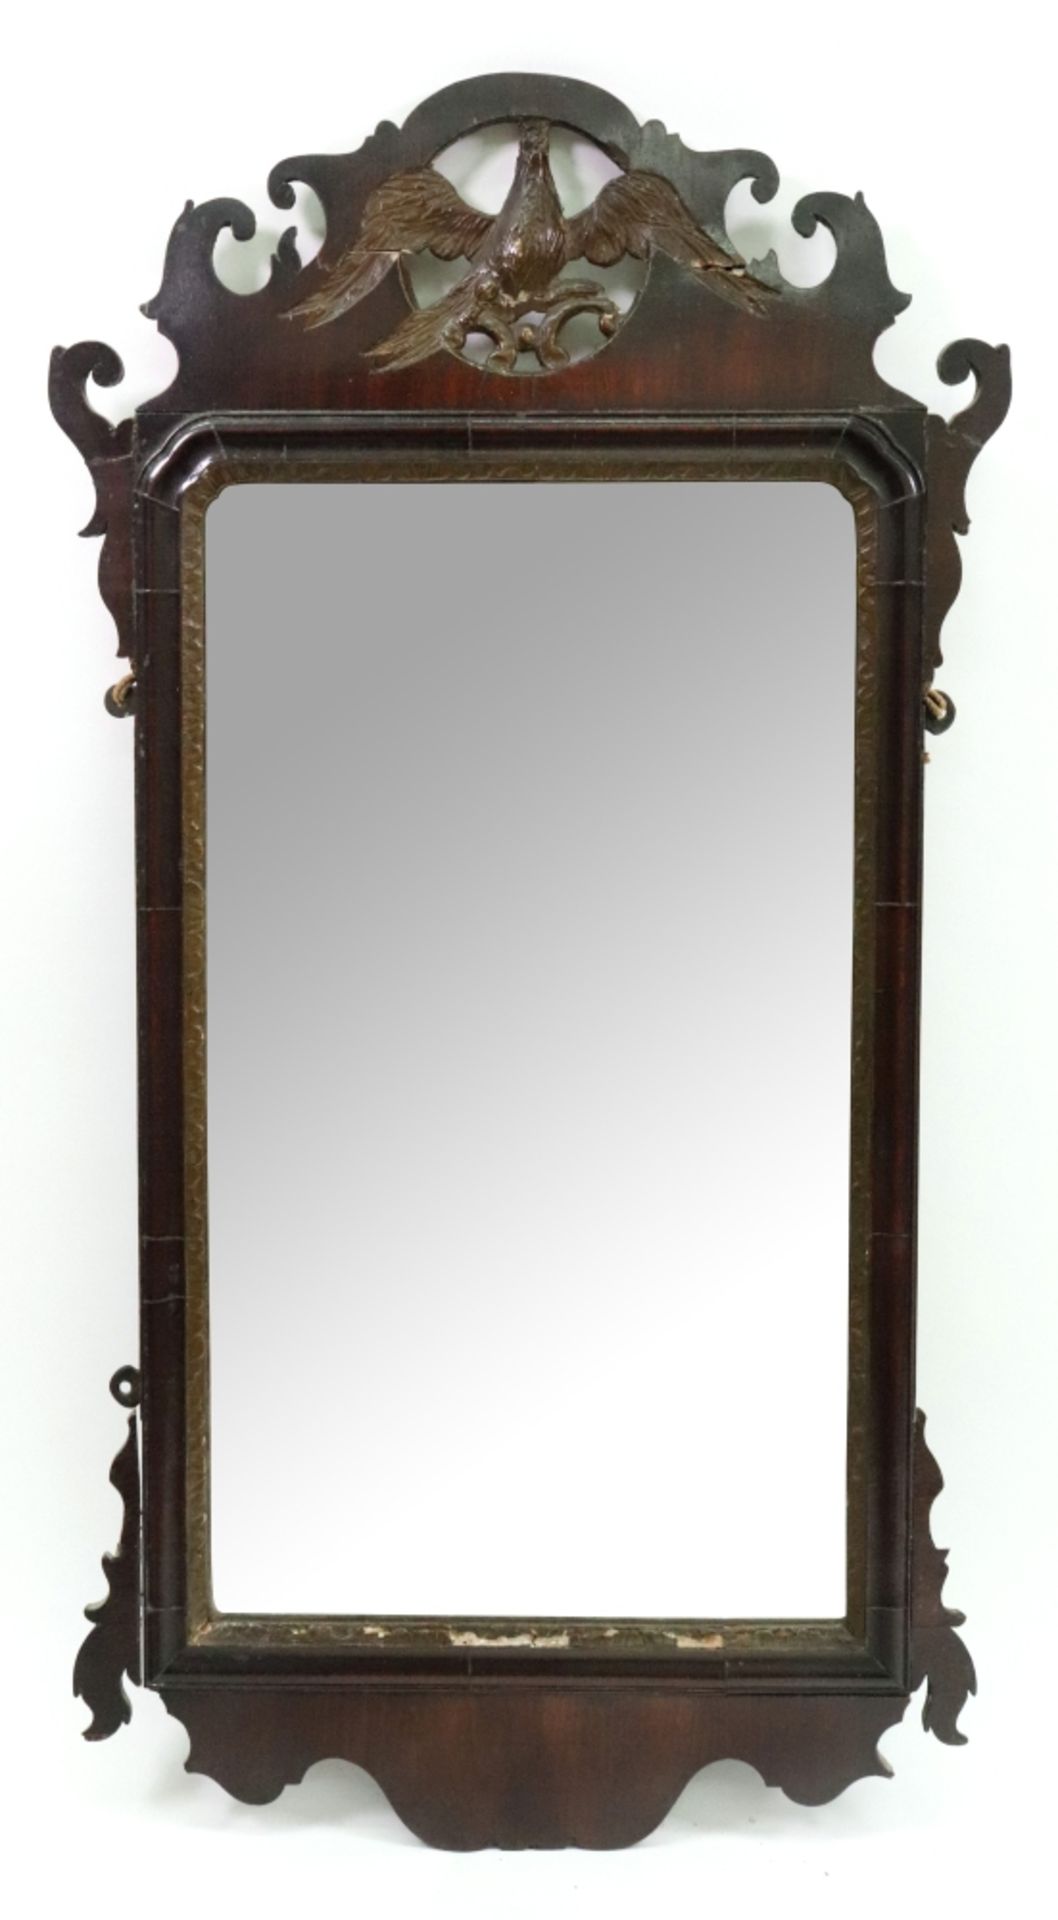 A Chippendale style upright wall mirror, 18th century,